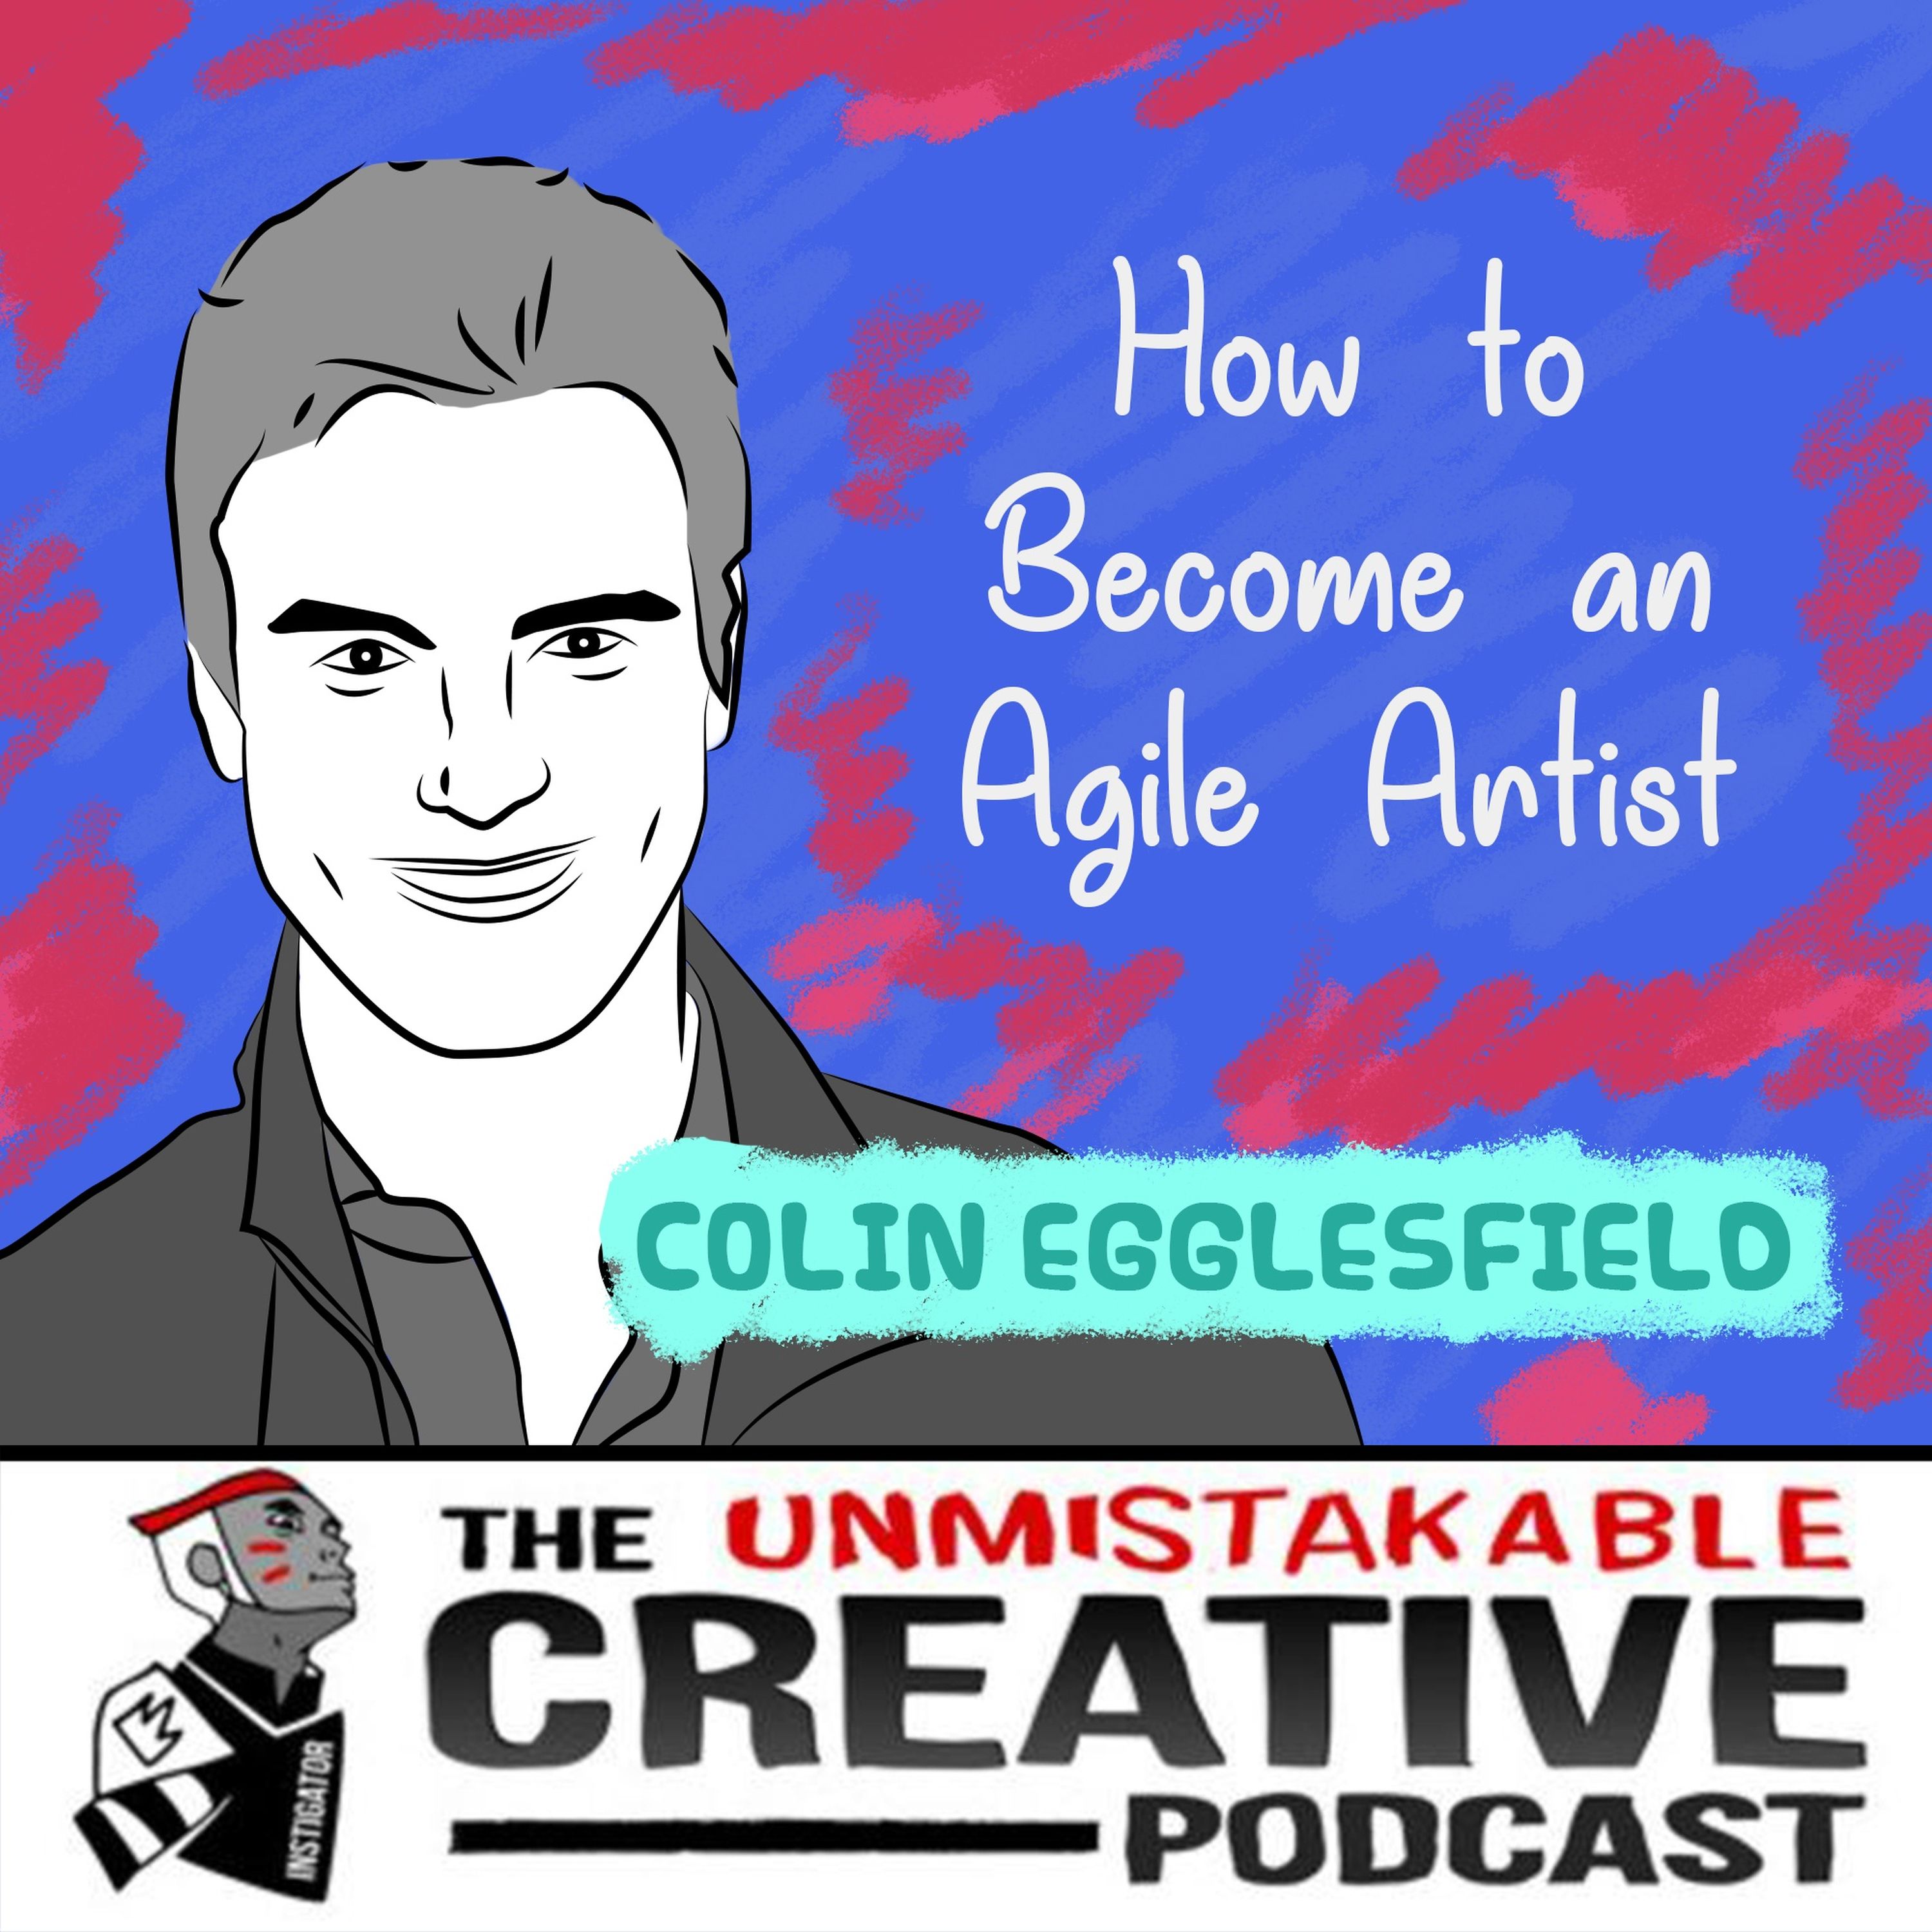 How to Become an Agile Artist with Colin Egglesfield Image